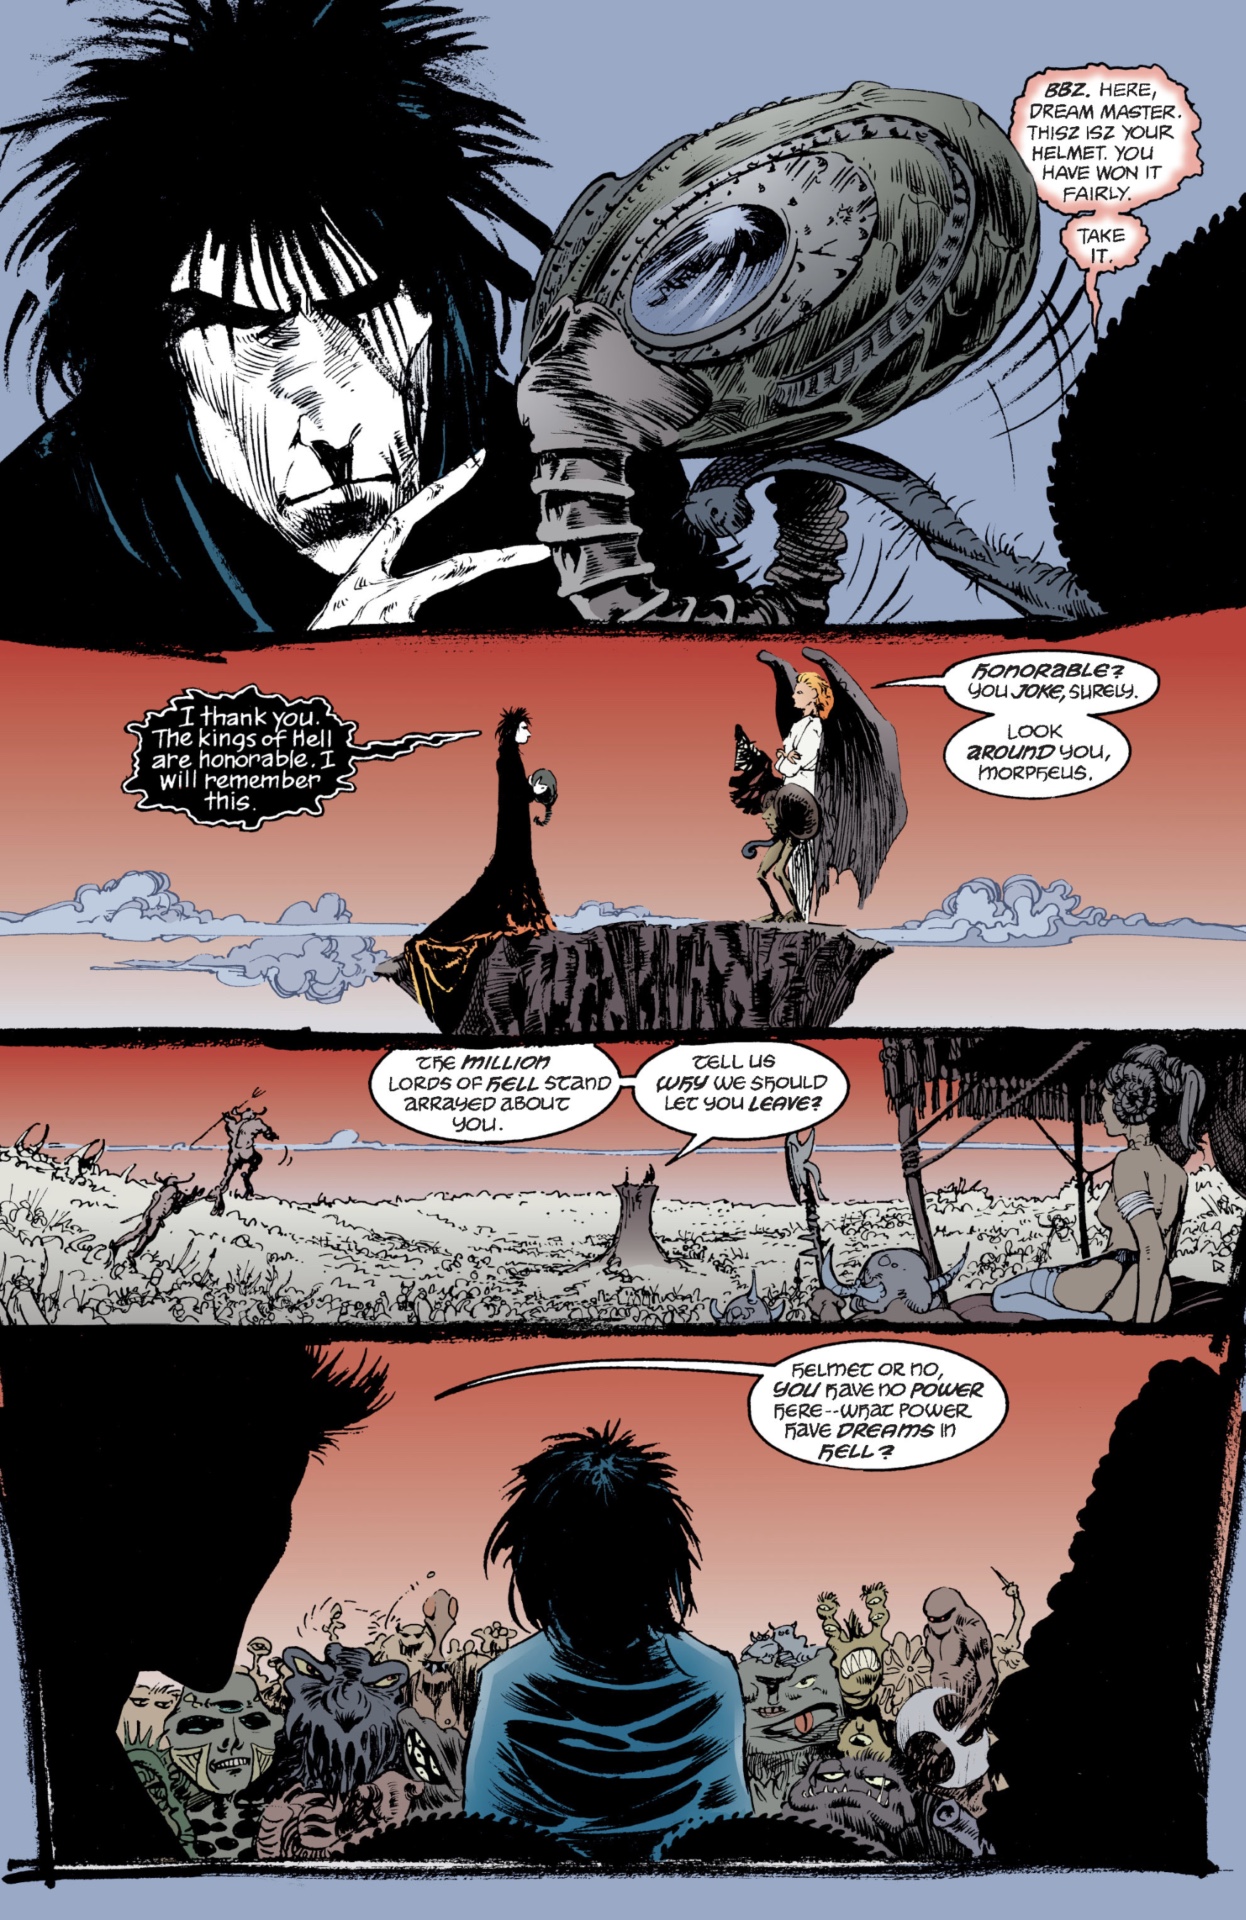 page from Sandman